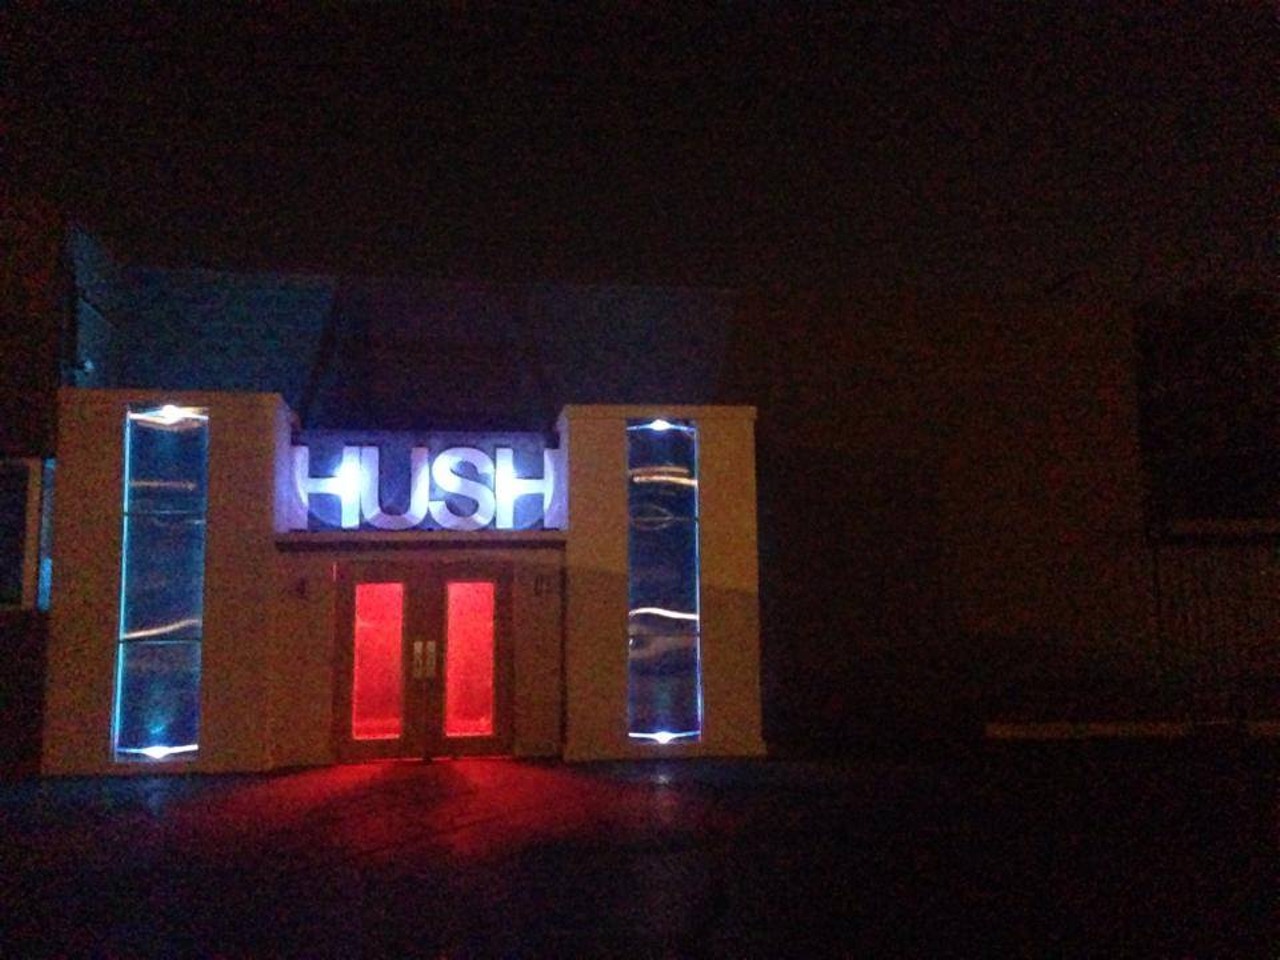 Hush Haunted Attraction
34043 Ford Rd, Westland
734-502-6026
Hush Haunted Attraction seeks to be an immersive experience for those looking for a heart-pounding good time. The attraction&#146;s sets and actors aim to provide a night of entertainment. Photo courtesy of Facebook